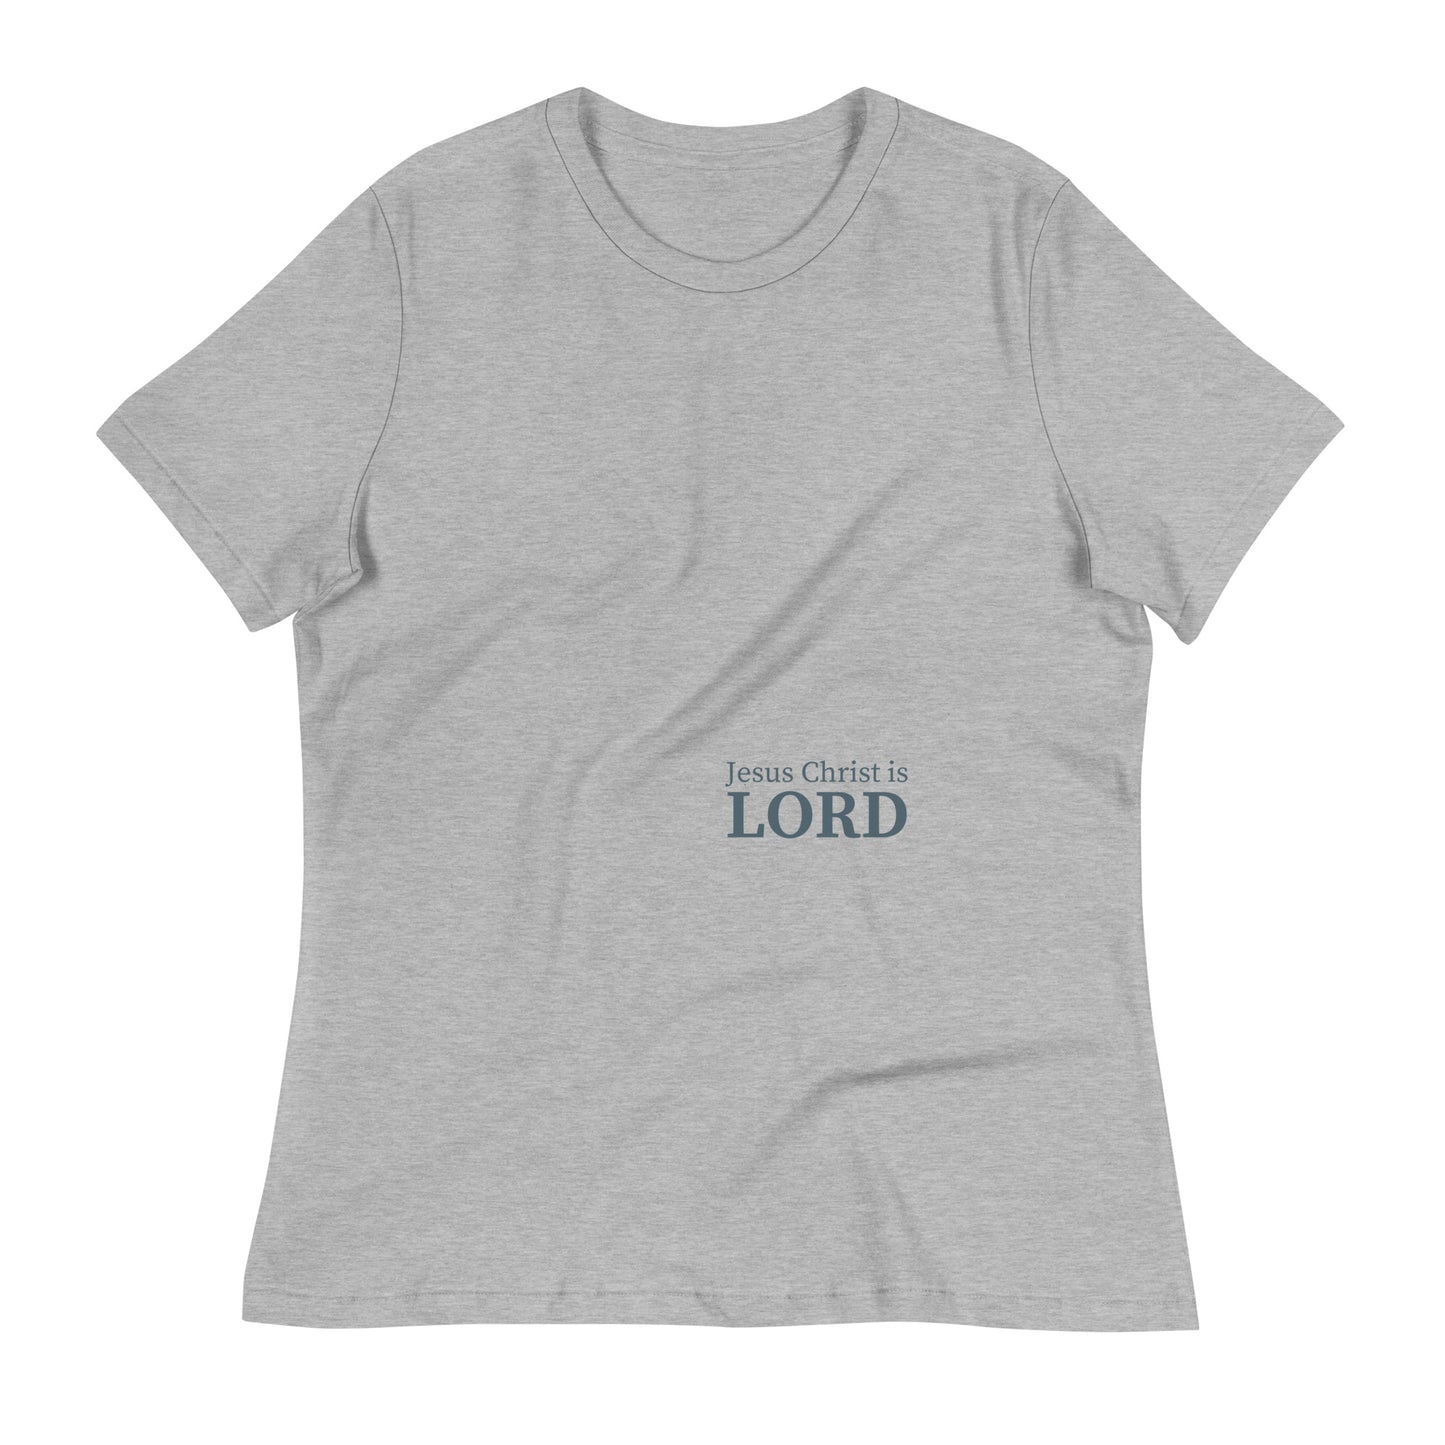 "The Lord" Women's Relaxed T-Shirt